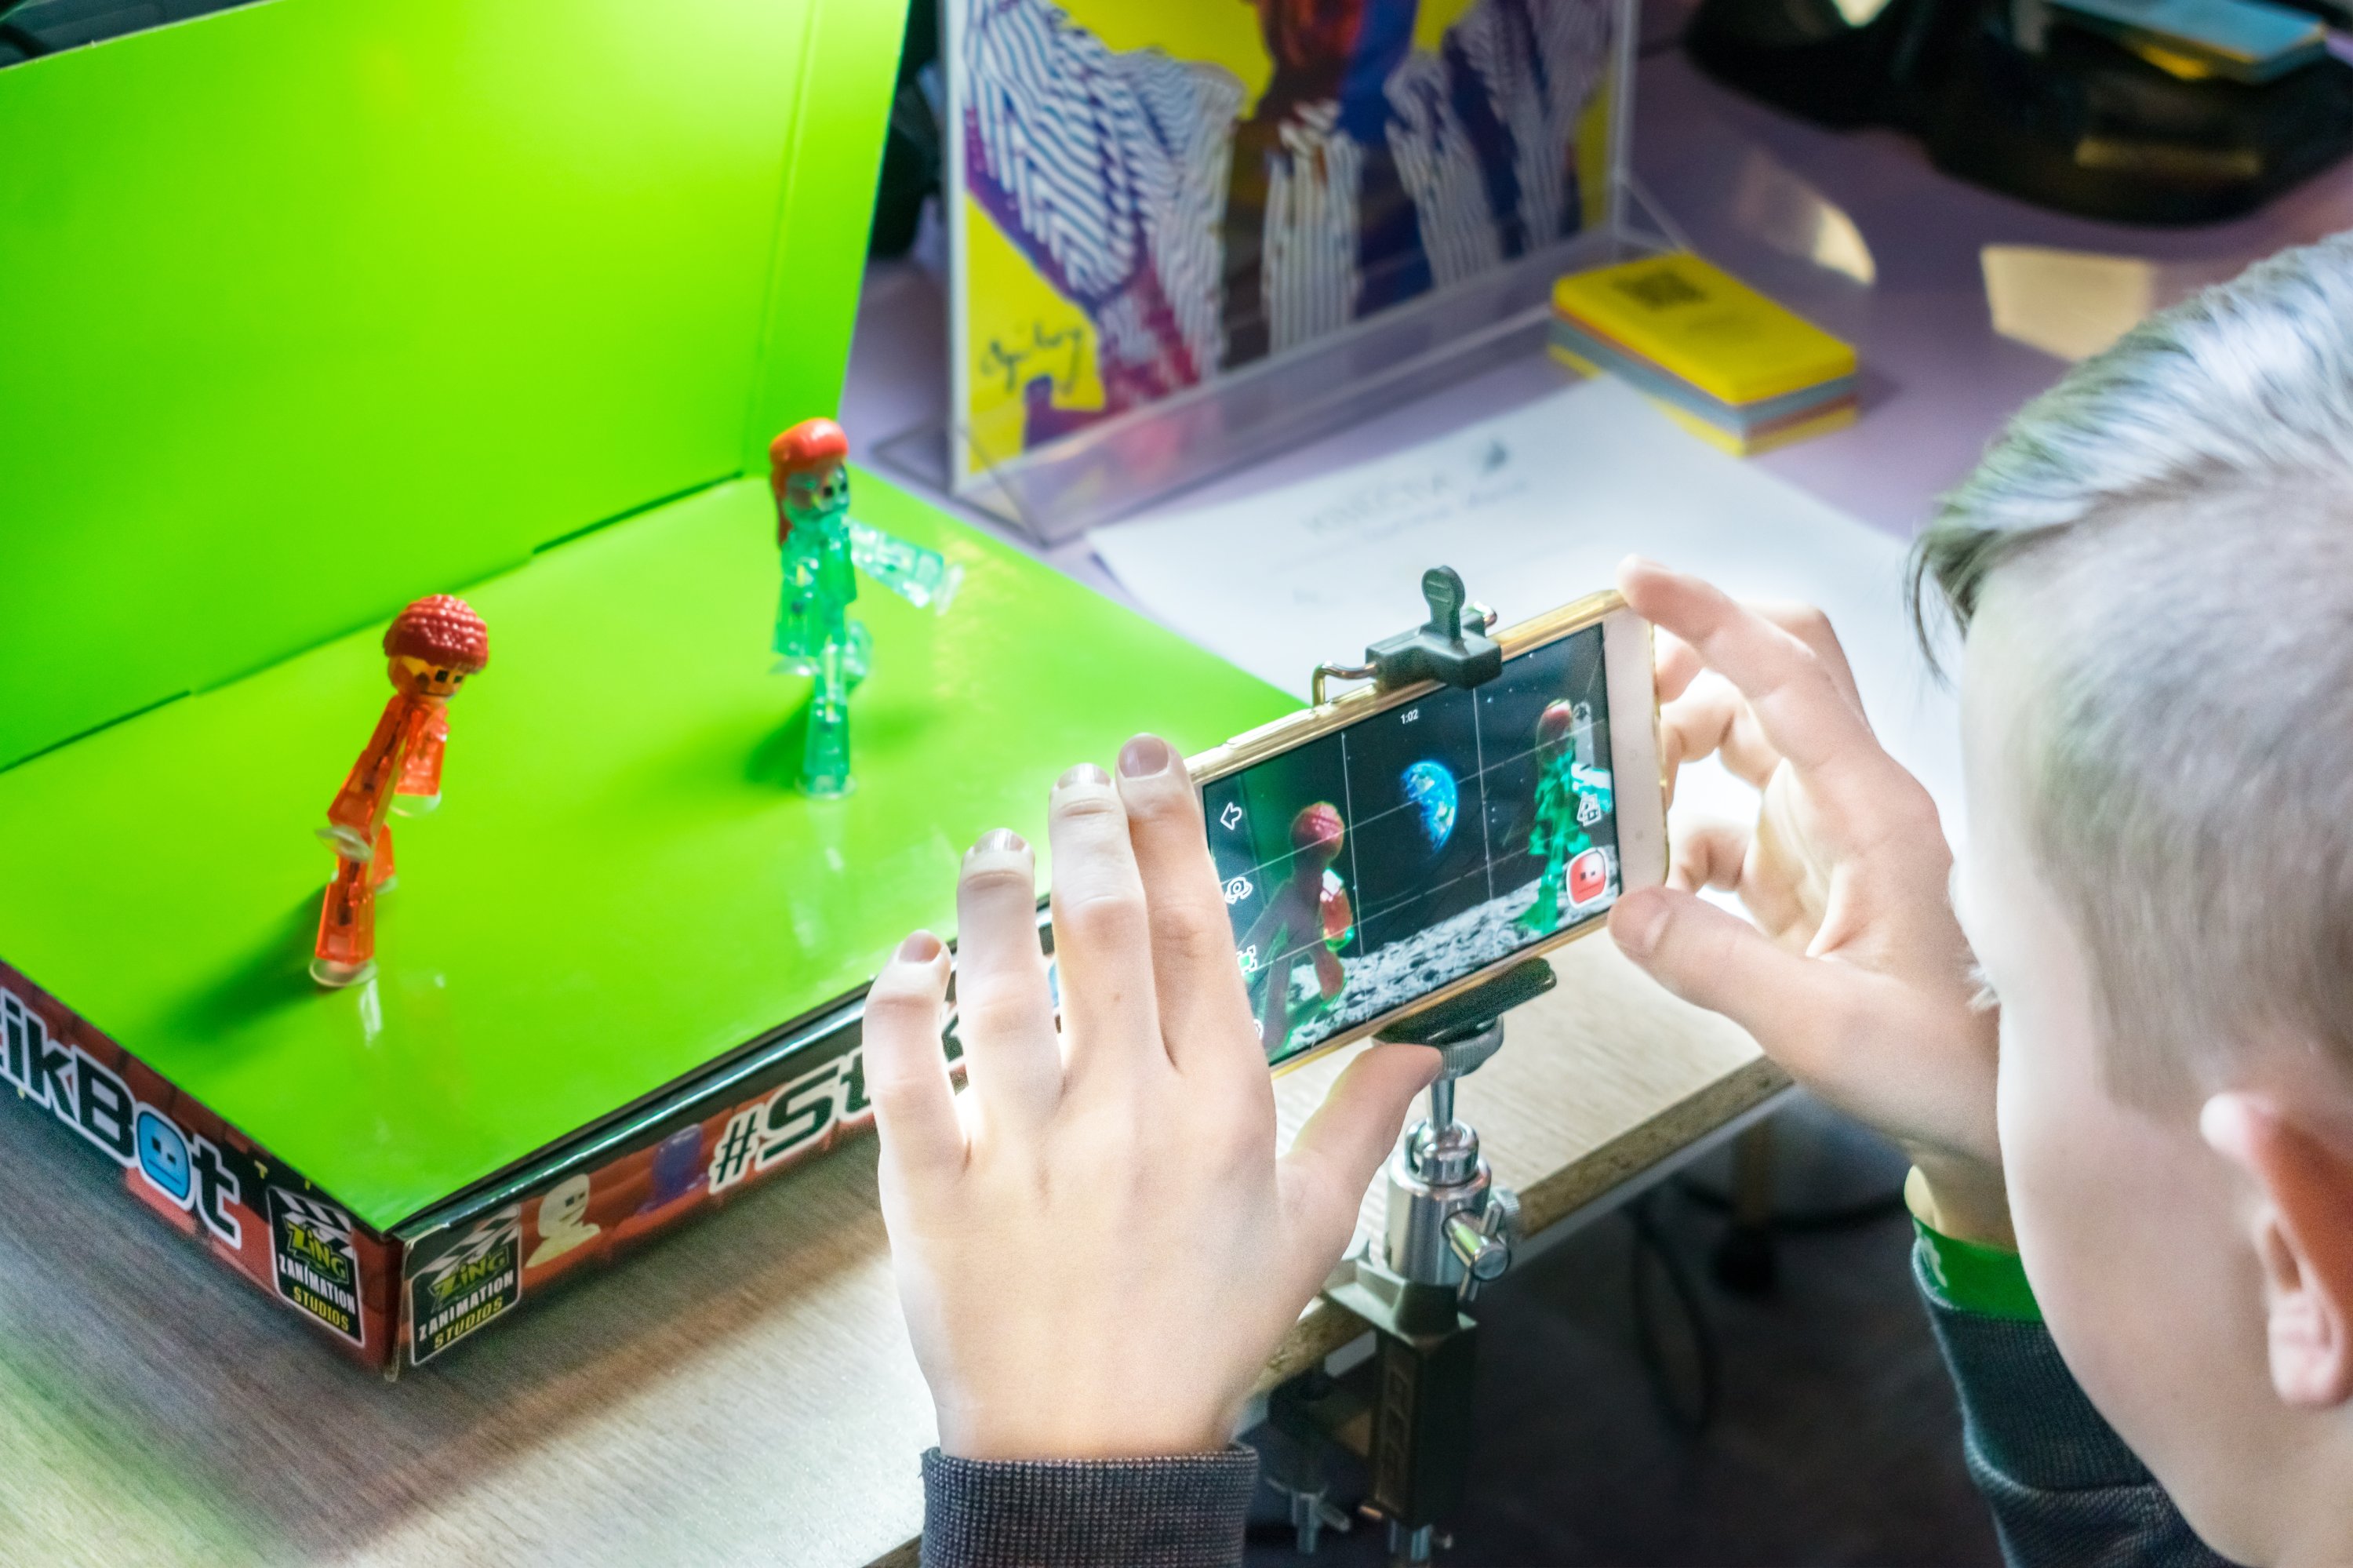 Youth to learn stop-motion at IKSV animation workshop | Daily Sabah